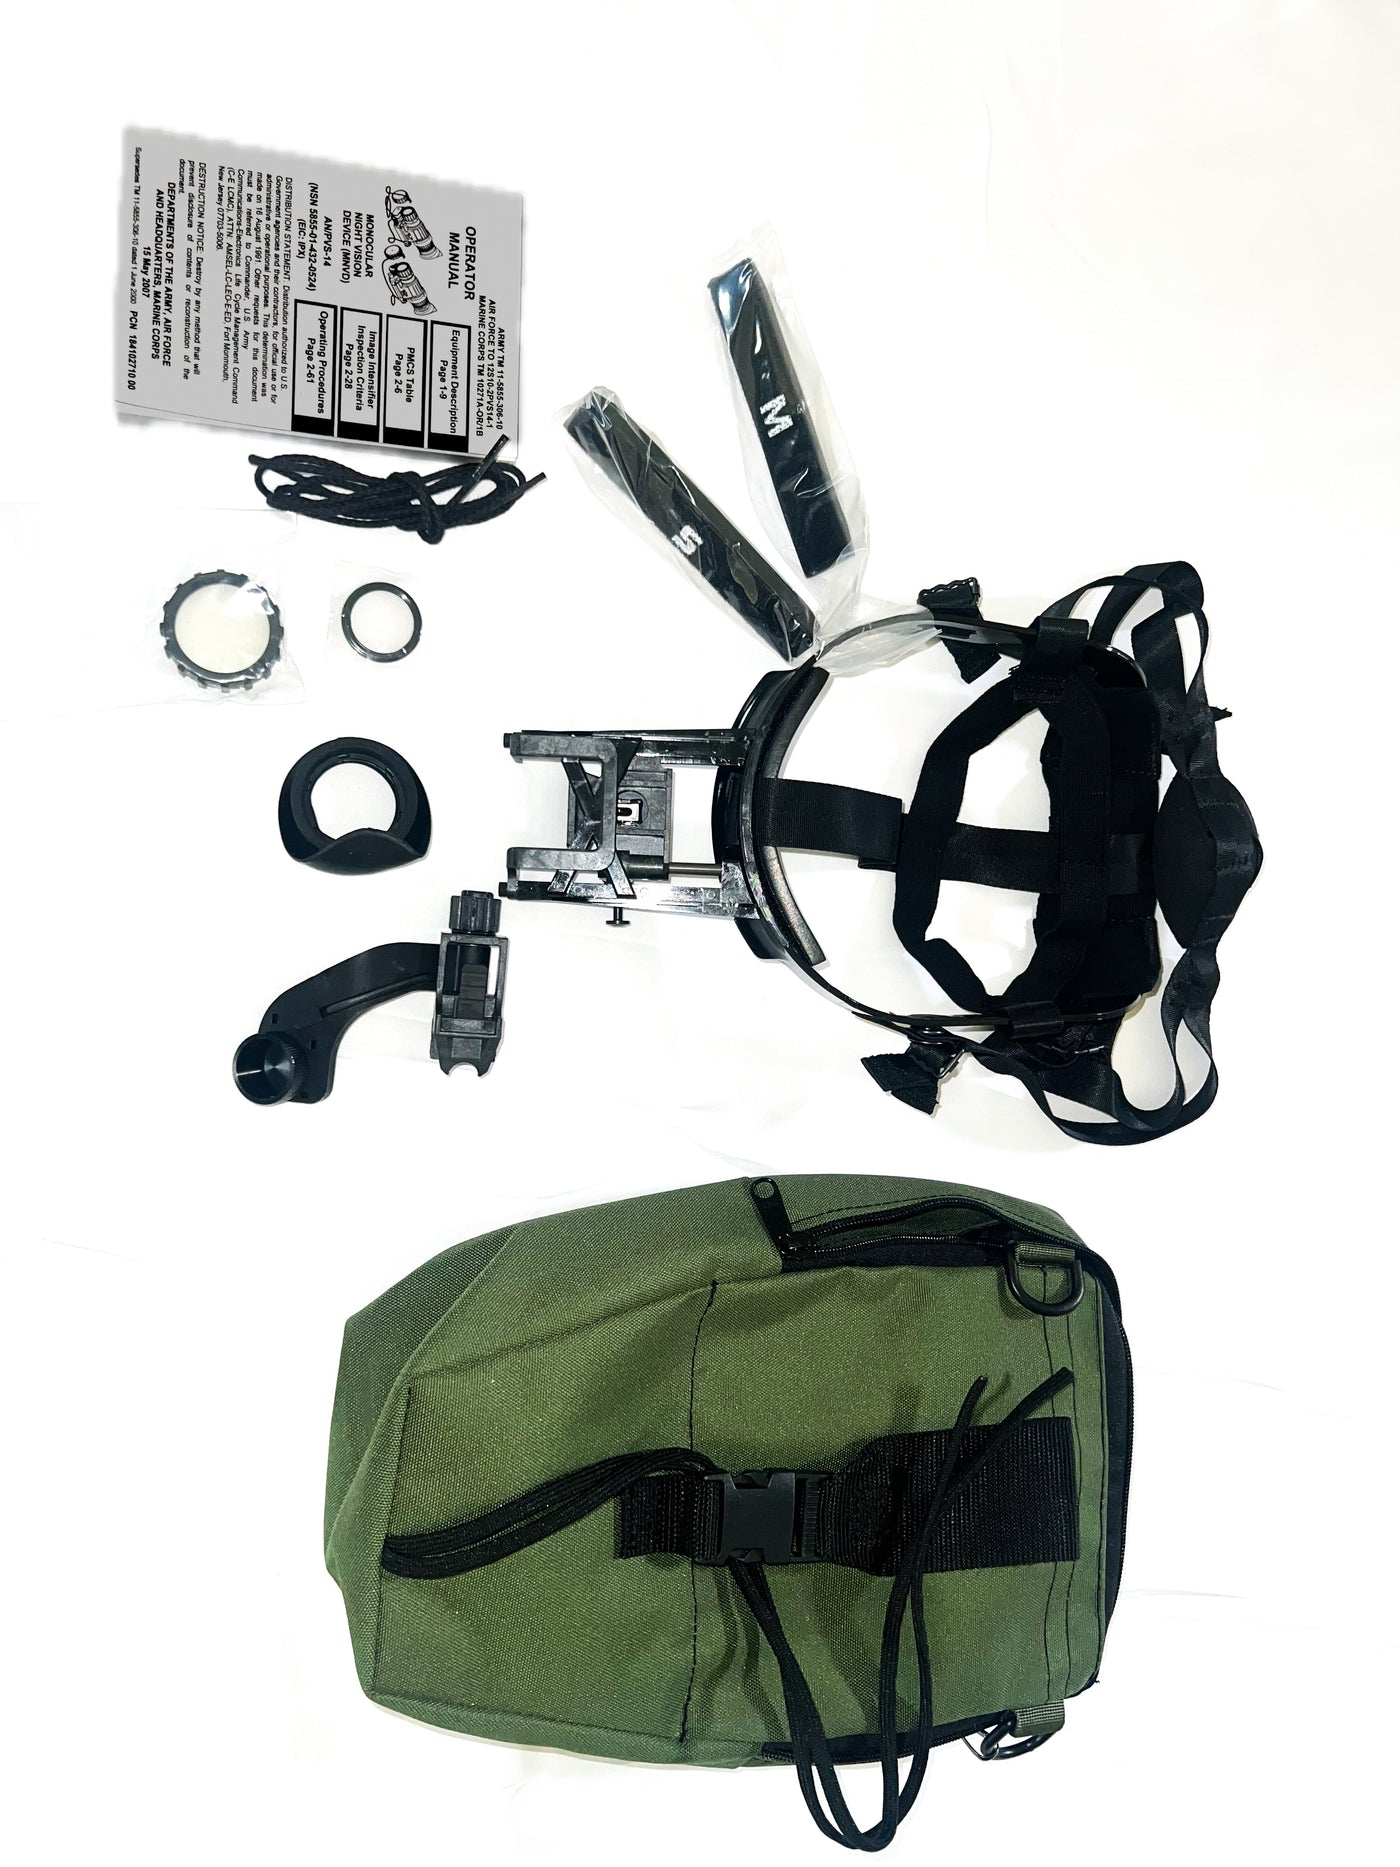 PVS-14 Gen 2 NVT Autogated Night Vision Monocular with Full Green Bag Accessories